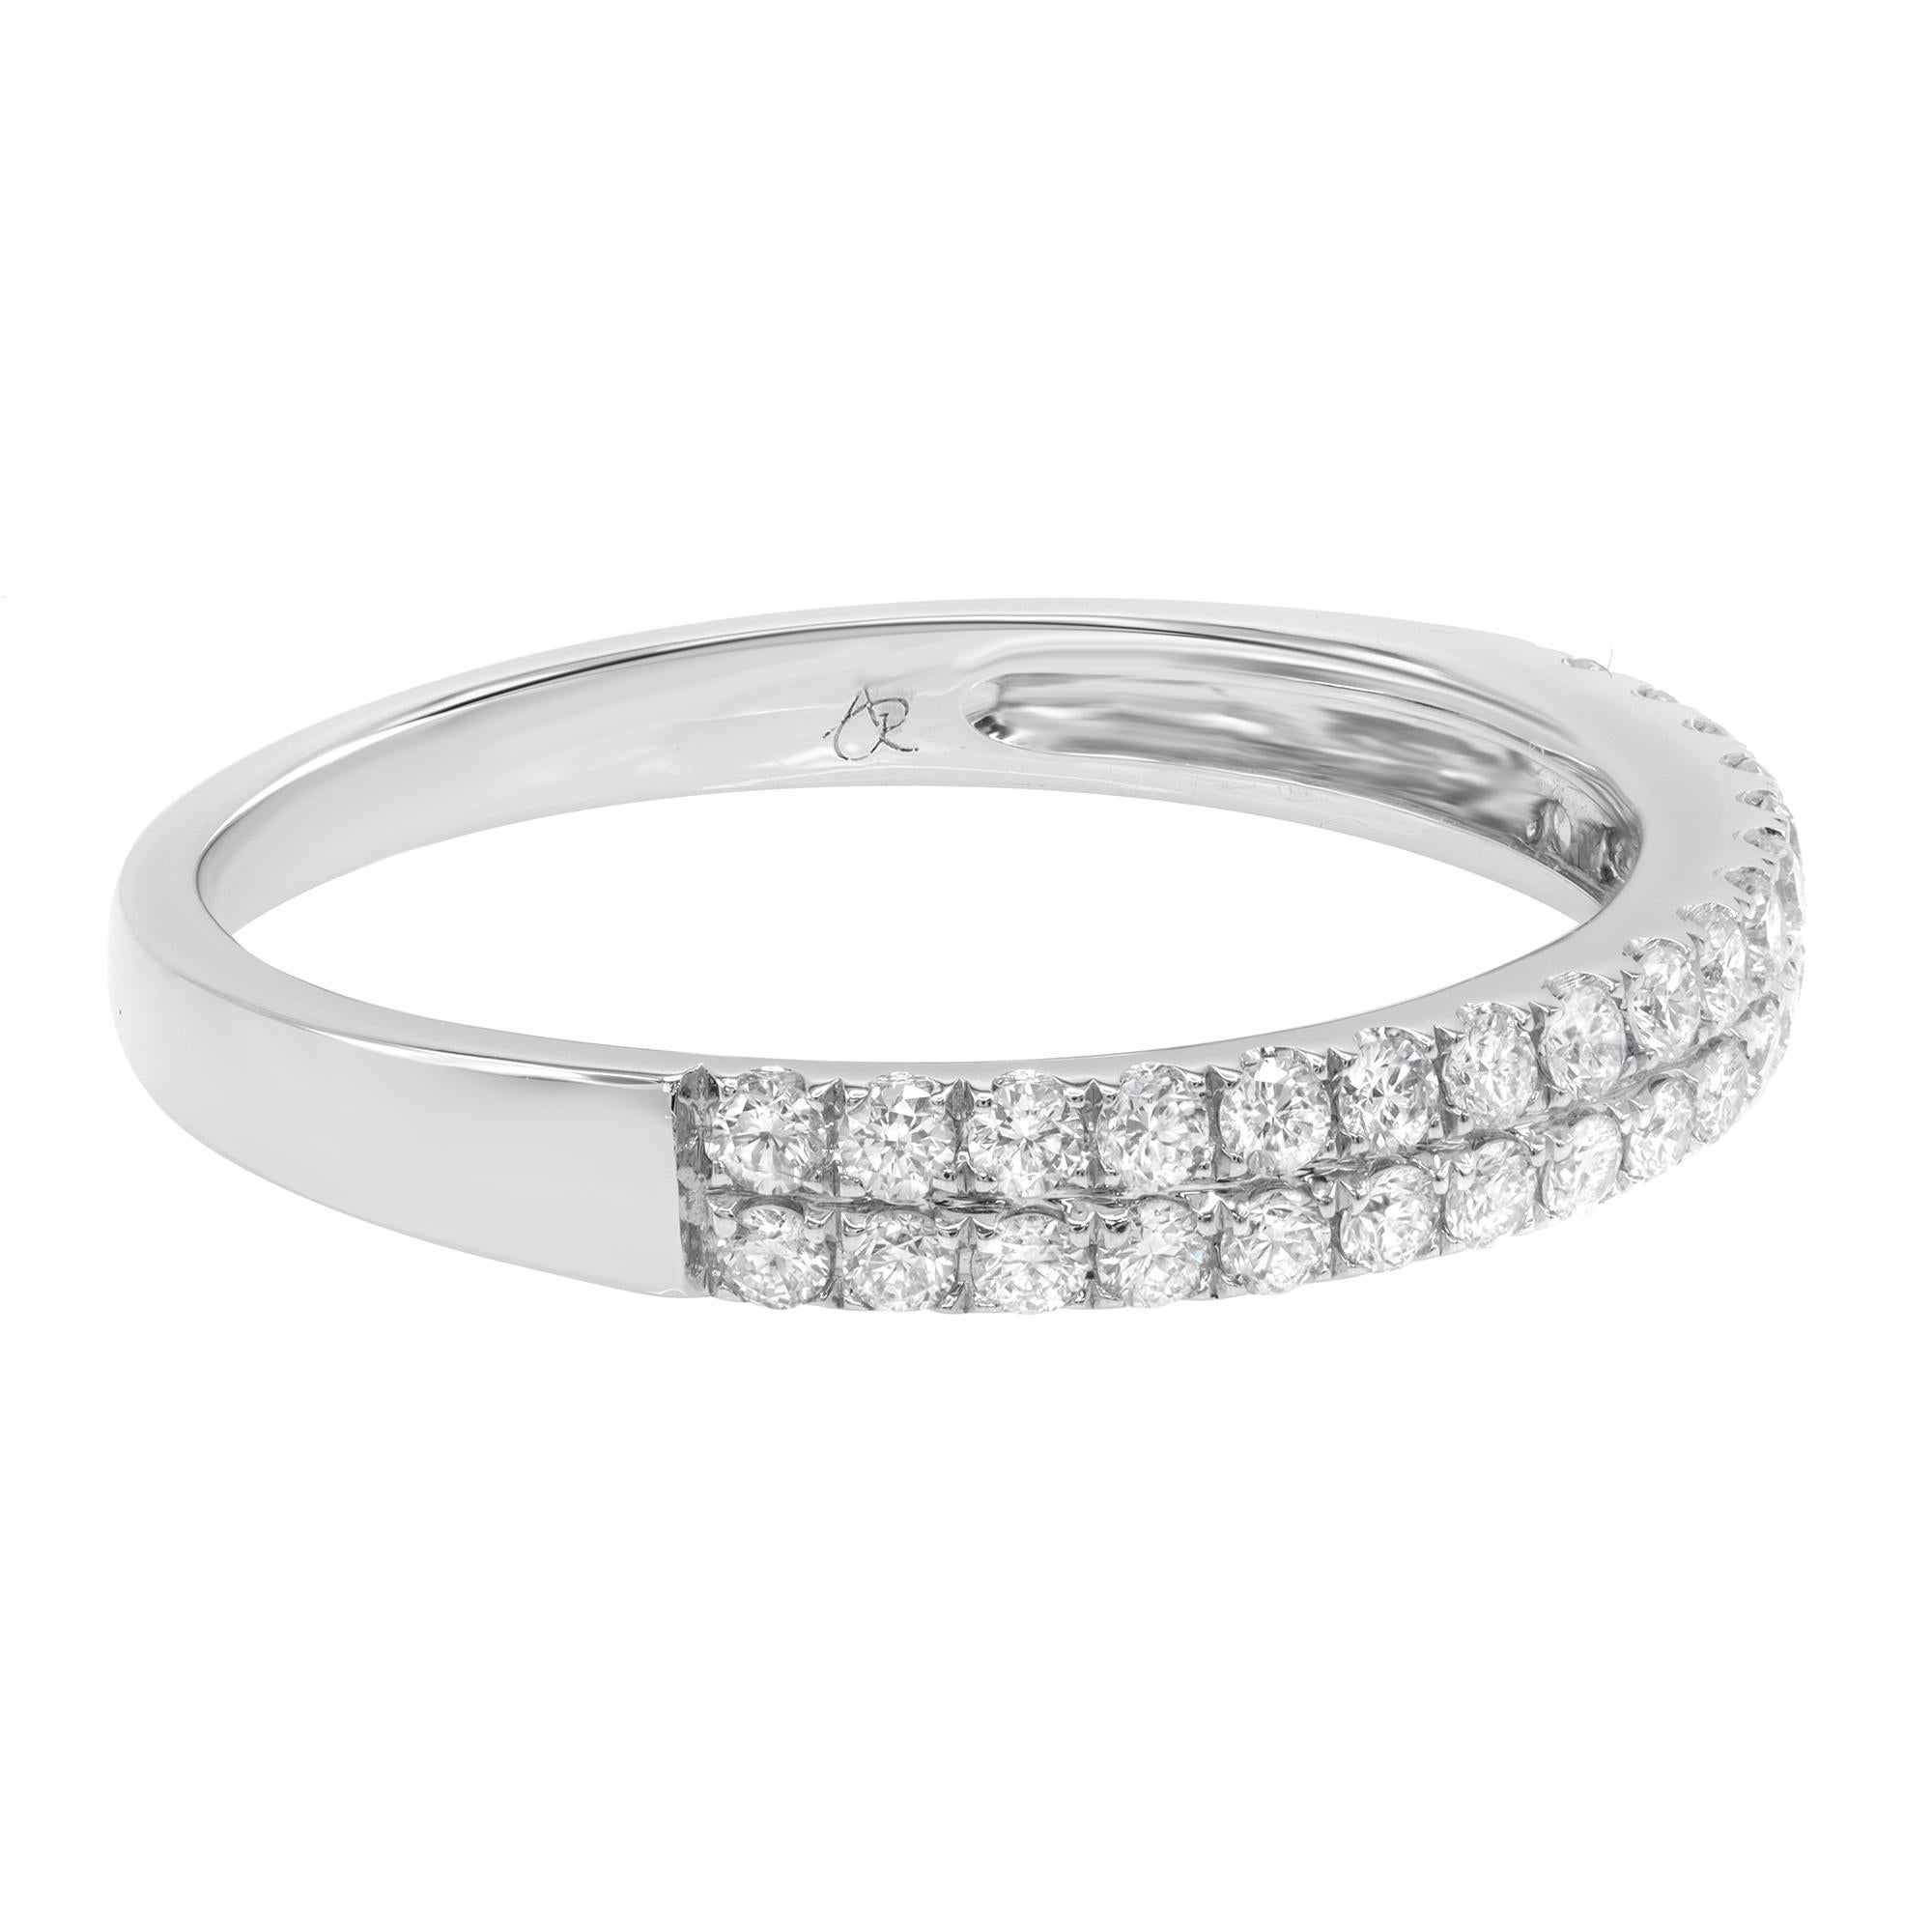 This 14 karat white gold wedding band features 34 sparkling round pave set diamonds at approximately 0.37 carat total weight. Each stone has been hand-matched to display consistent fire and brilliance. Diamond color I and SI-I clarity. The band